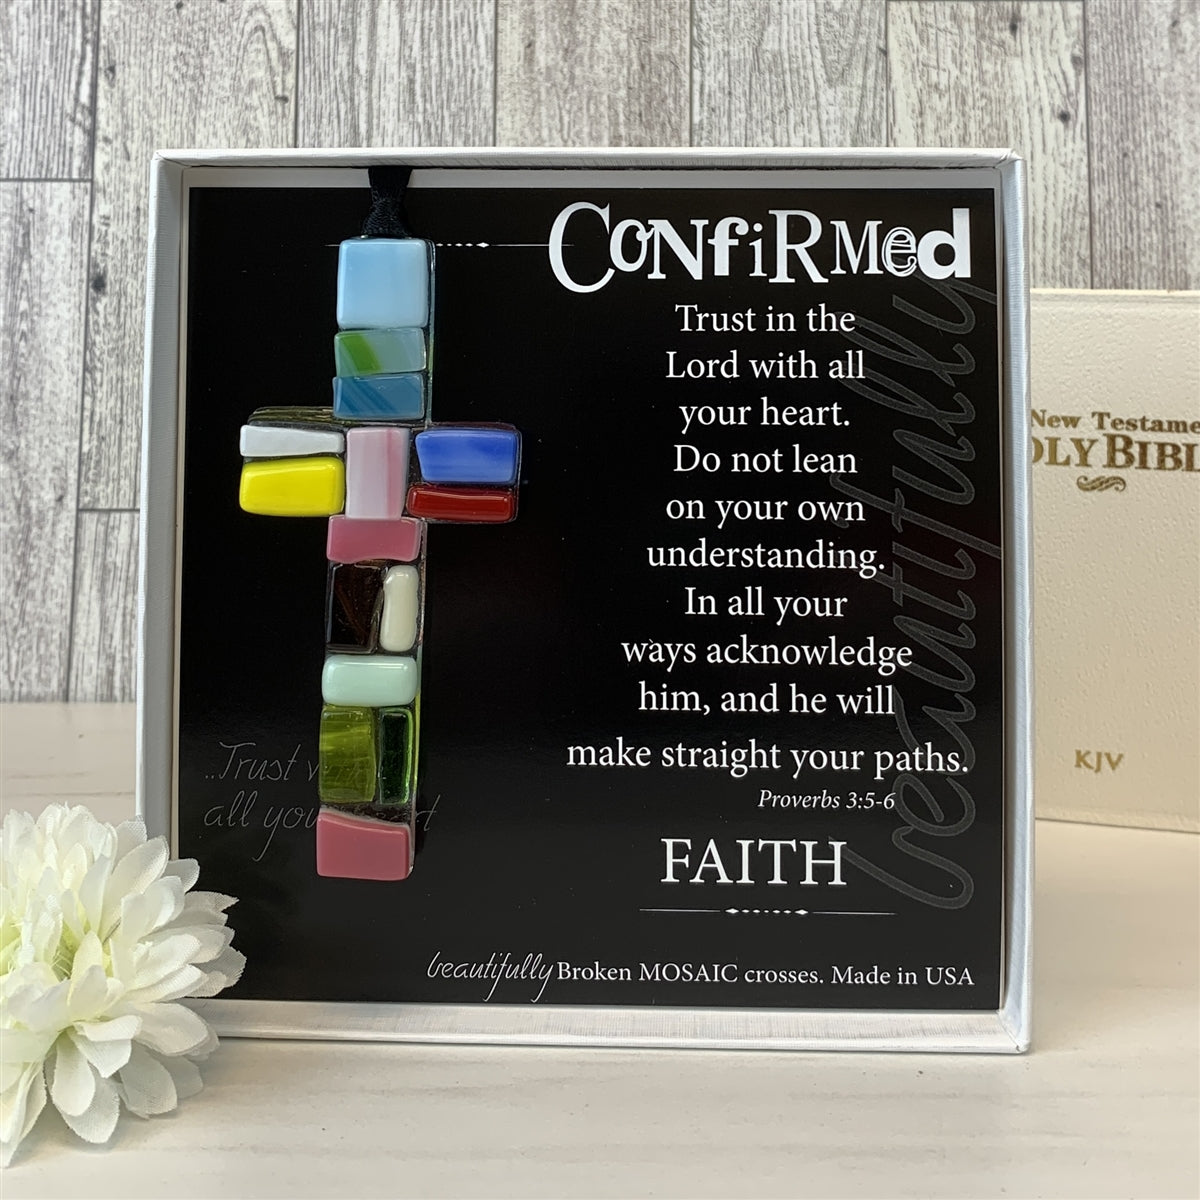 Confirmed glass mosaic cross with bible in background.